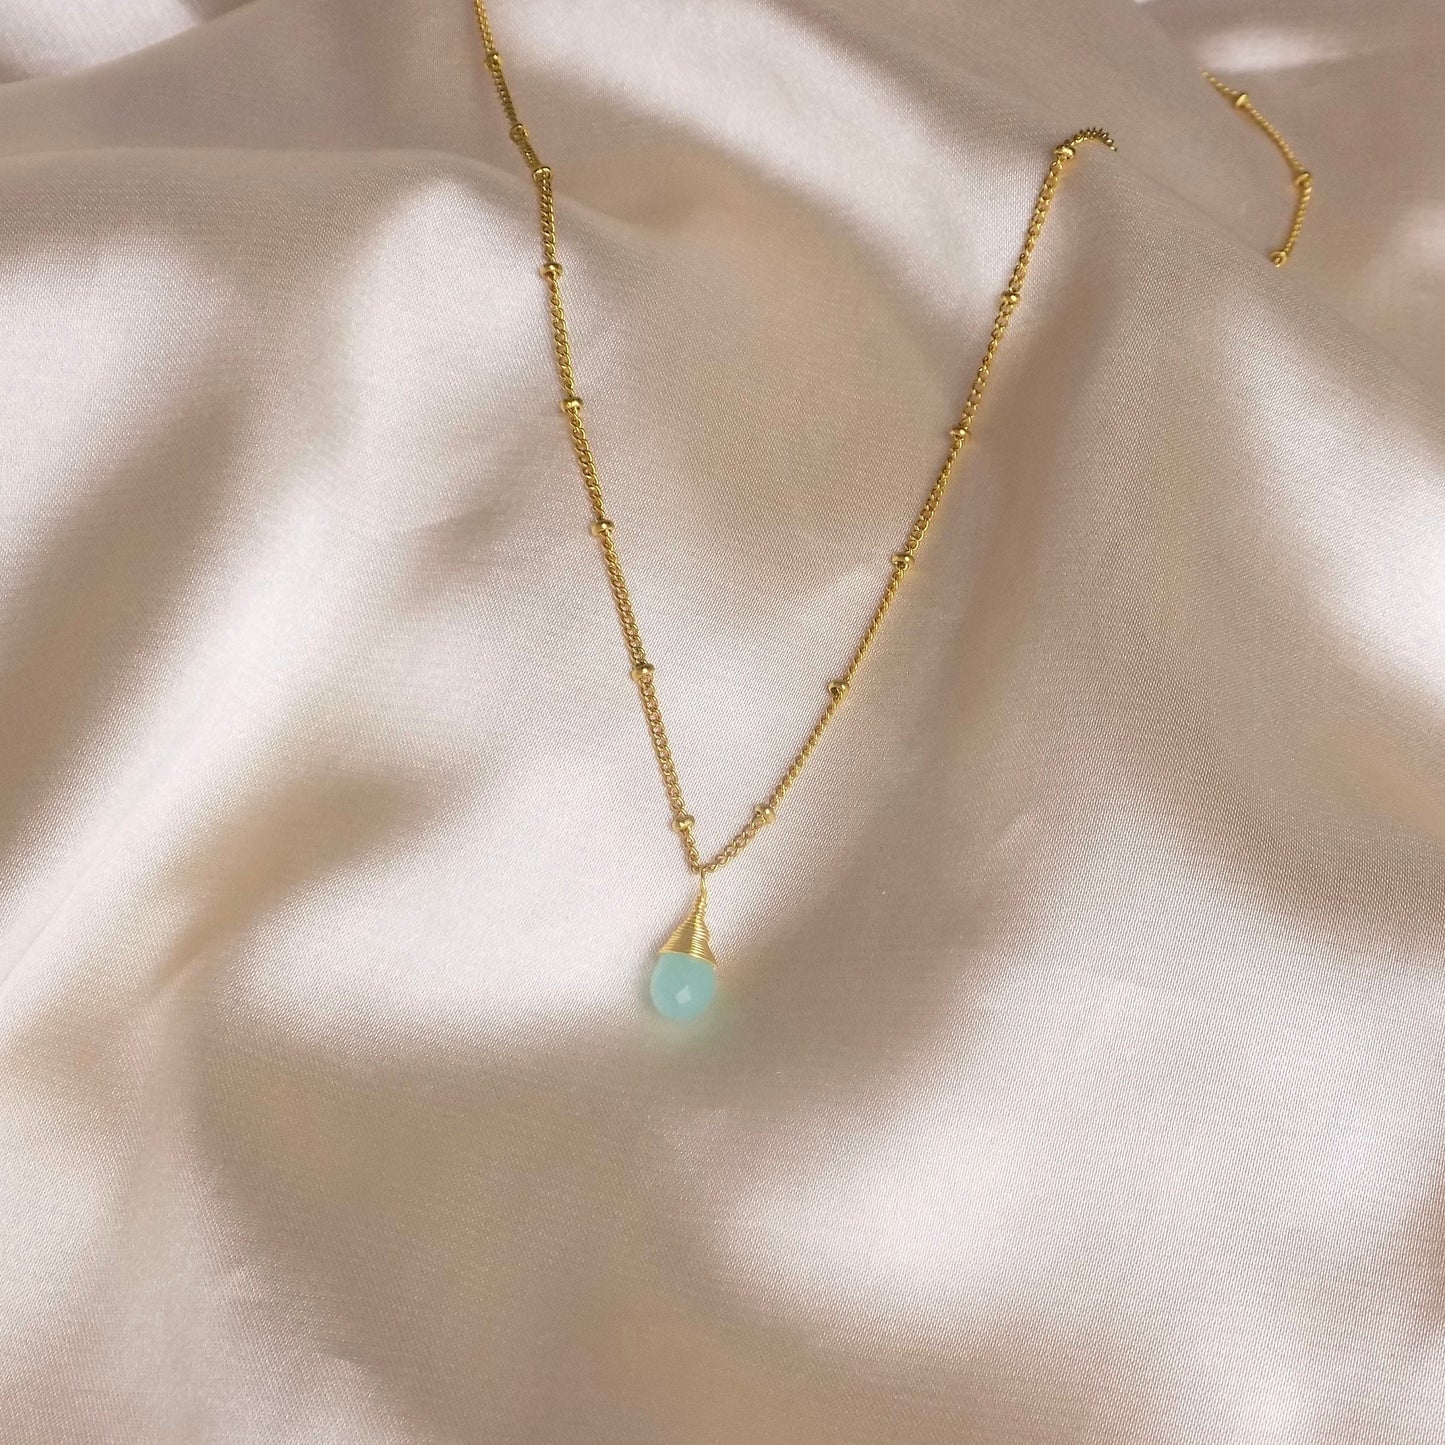 Gold Satellite Chain With Small Aqua Chalcedony Charm, 18K Gold Stainless Steel, Minimalist Layer, M7-73